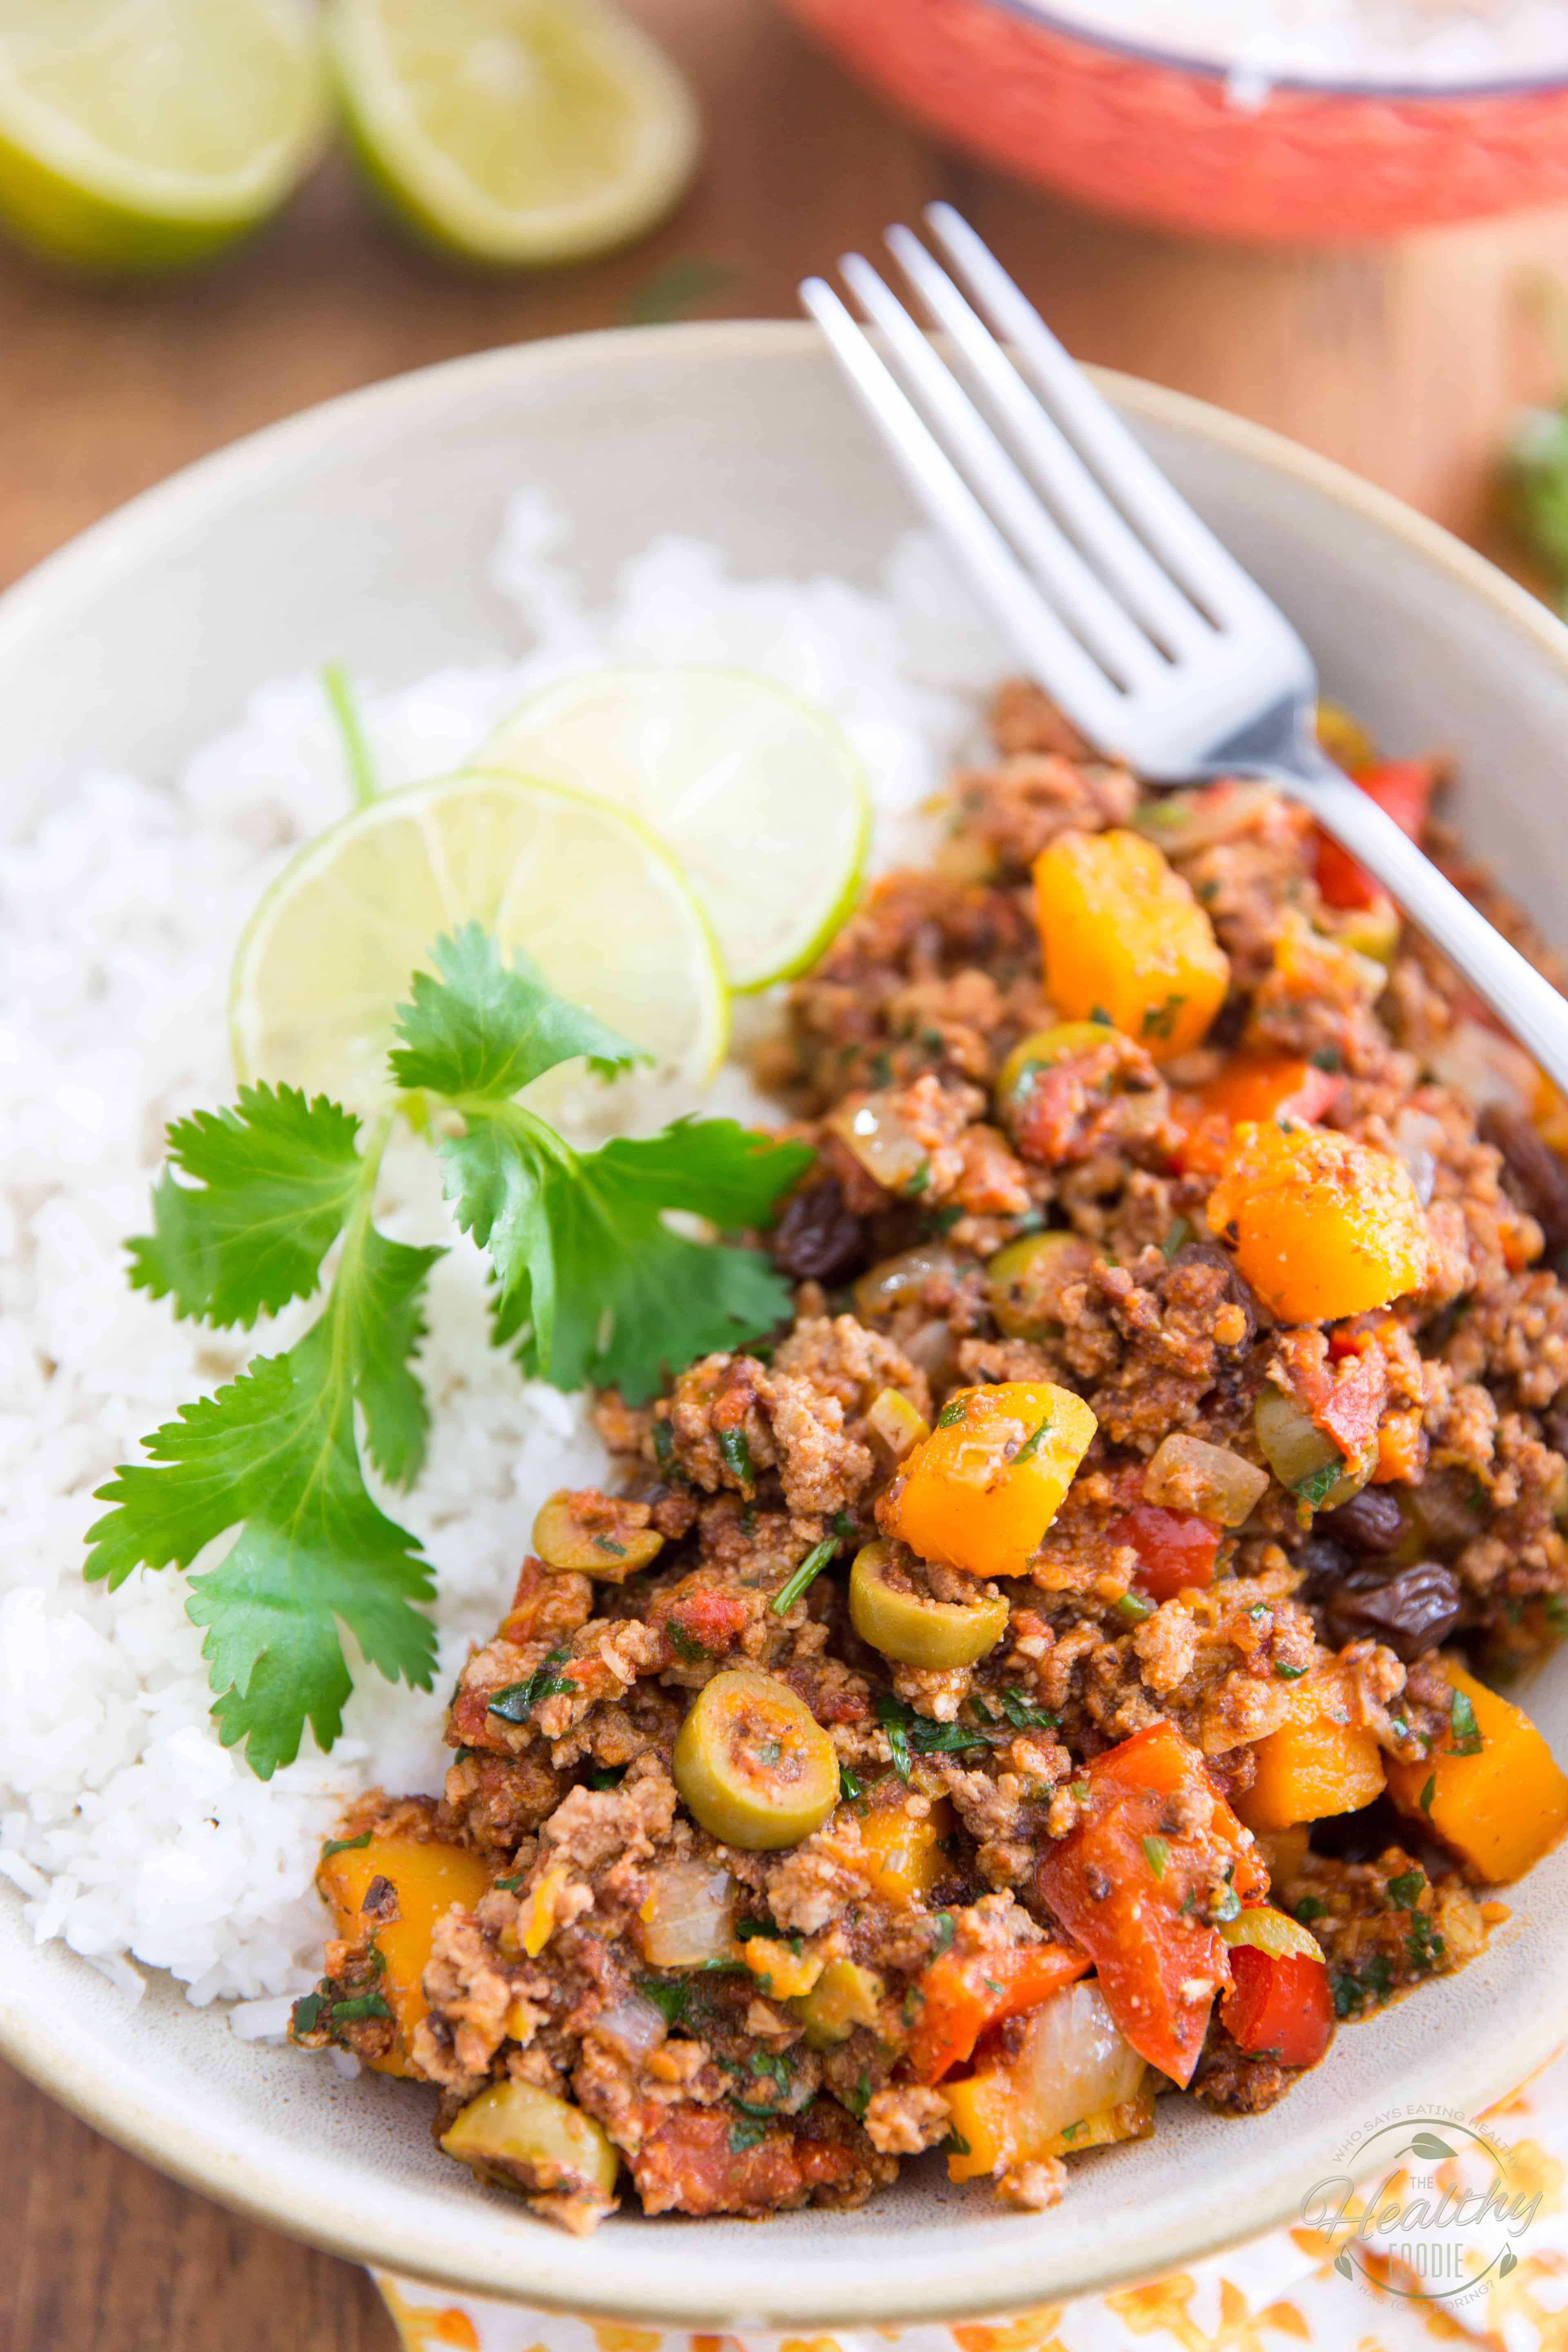 This Costa Rican Butternut Squash Picadillo is exploding with all kinds of exotic and bold flavors and filled with nothing but wholesome ingredients! A healthy gustatory experience you won't soon forget!